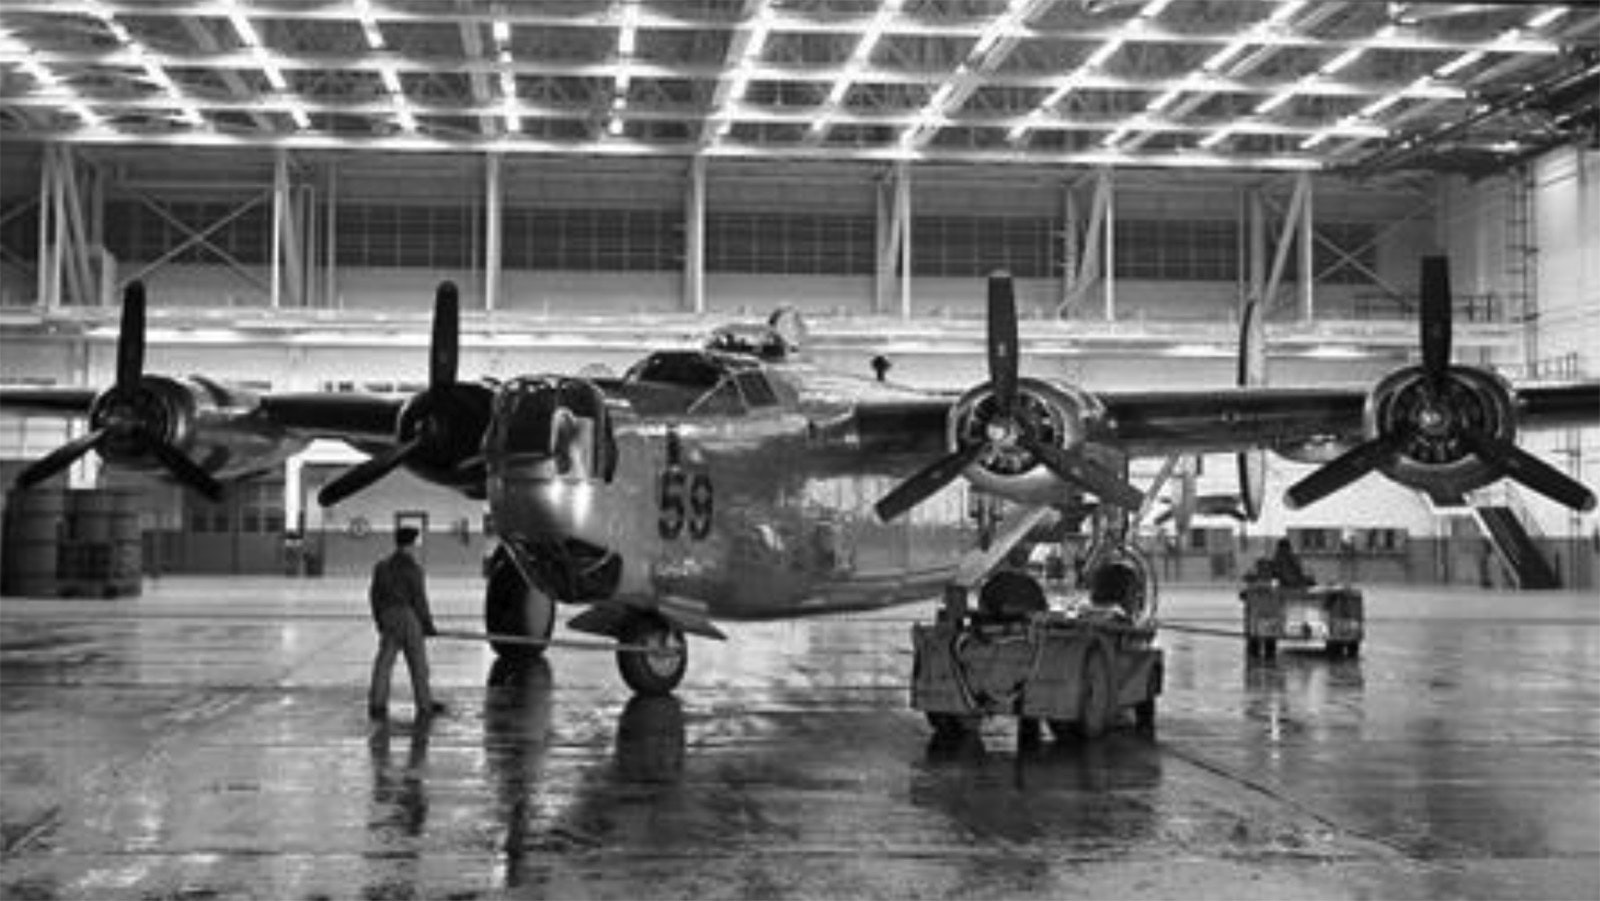 The B-24 bomber number 59 at the Ford Willow Creek Assembly Plant outside Detroit, Michigan.